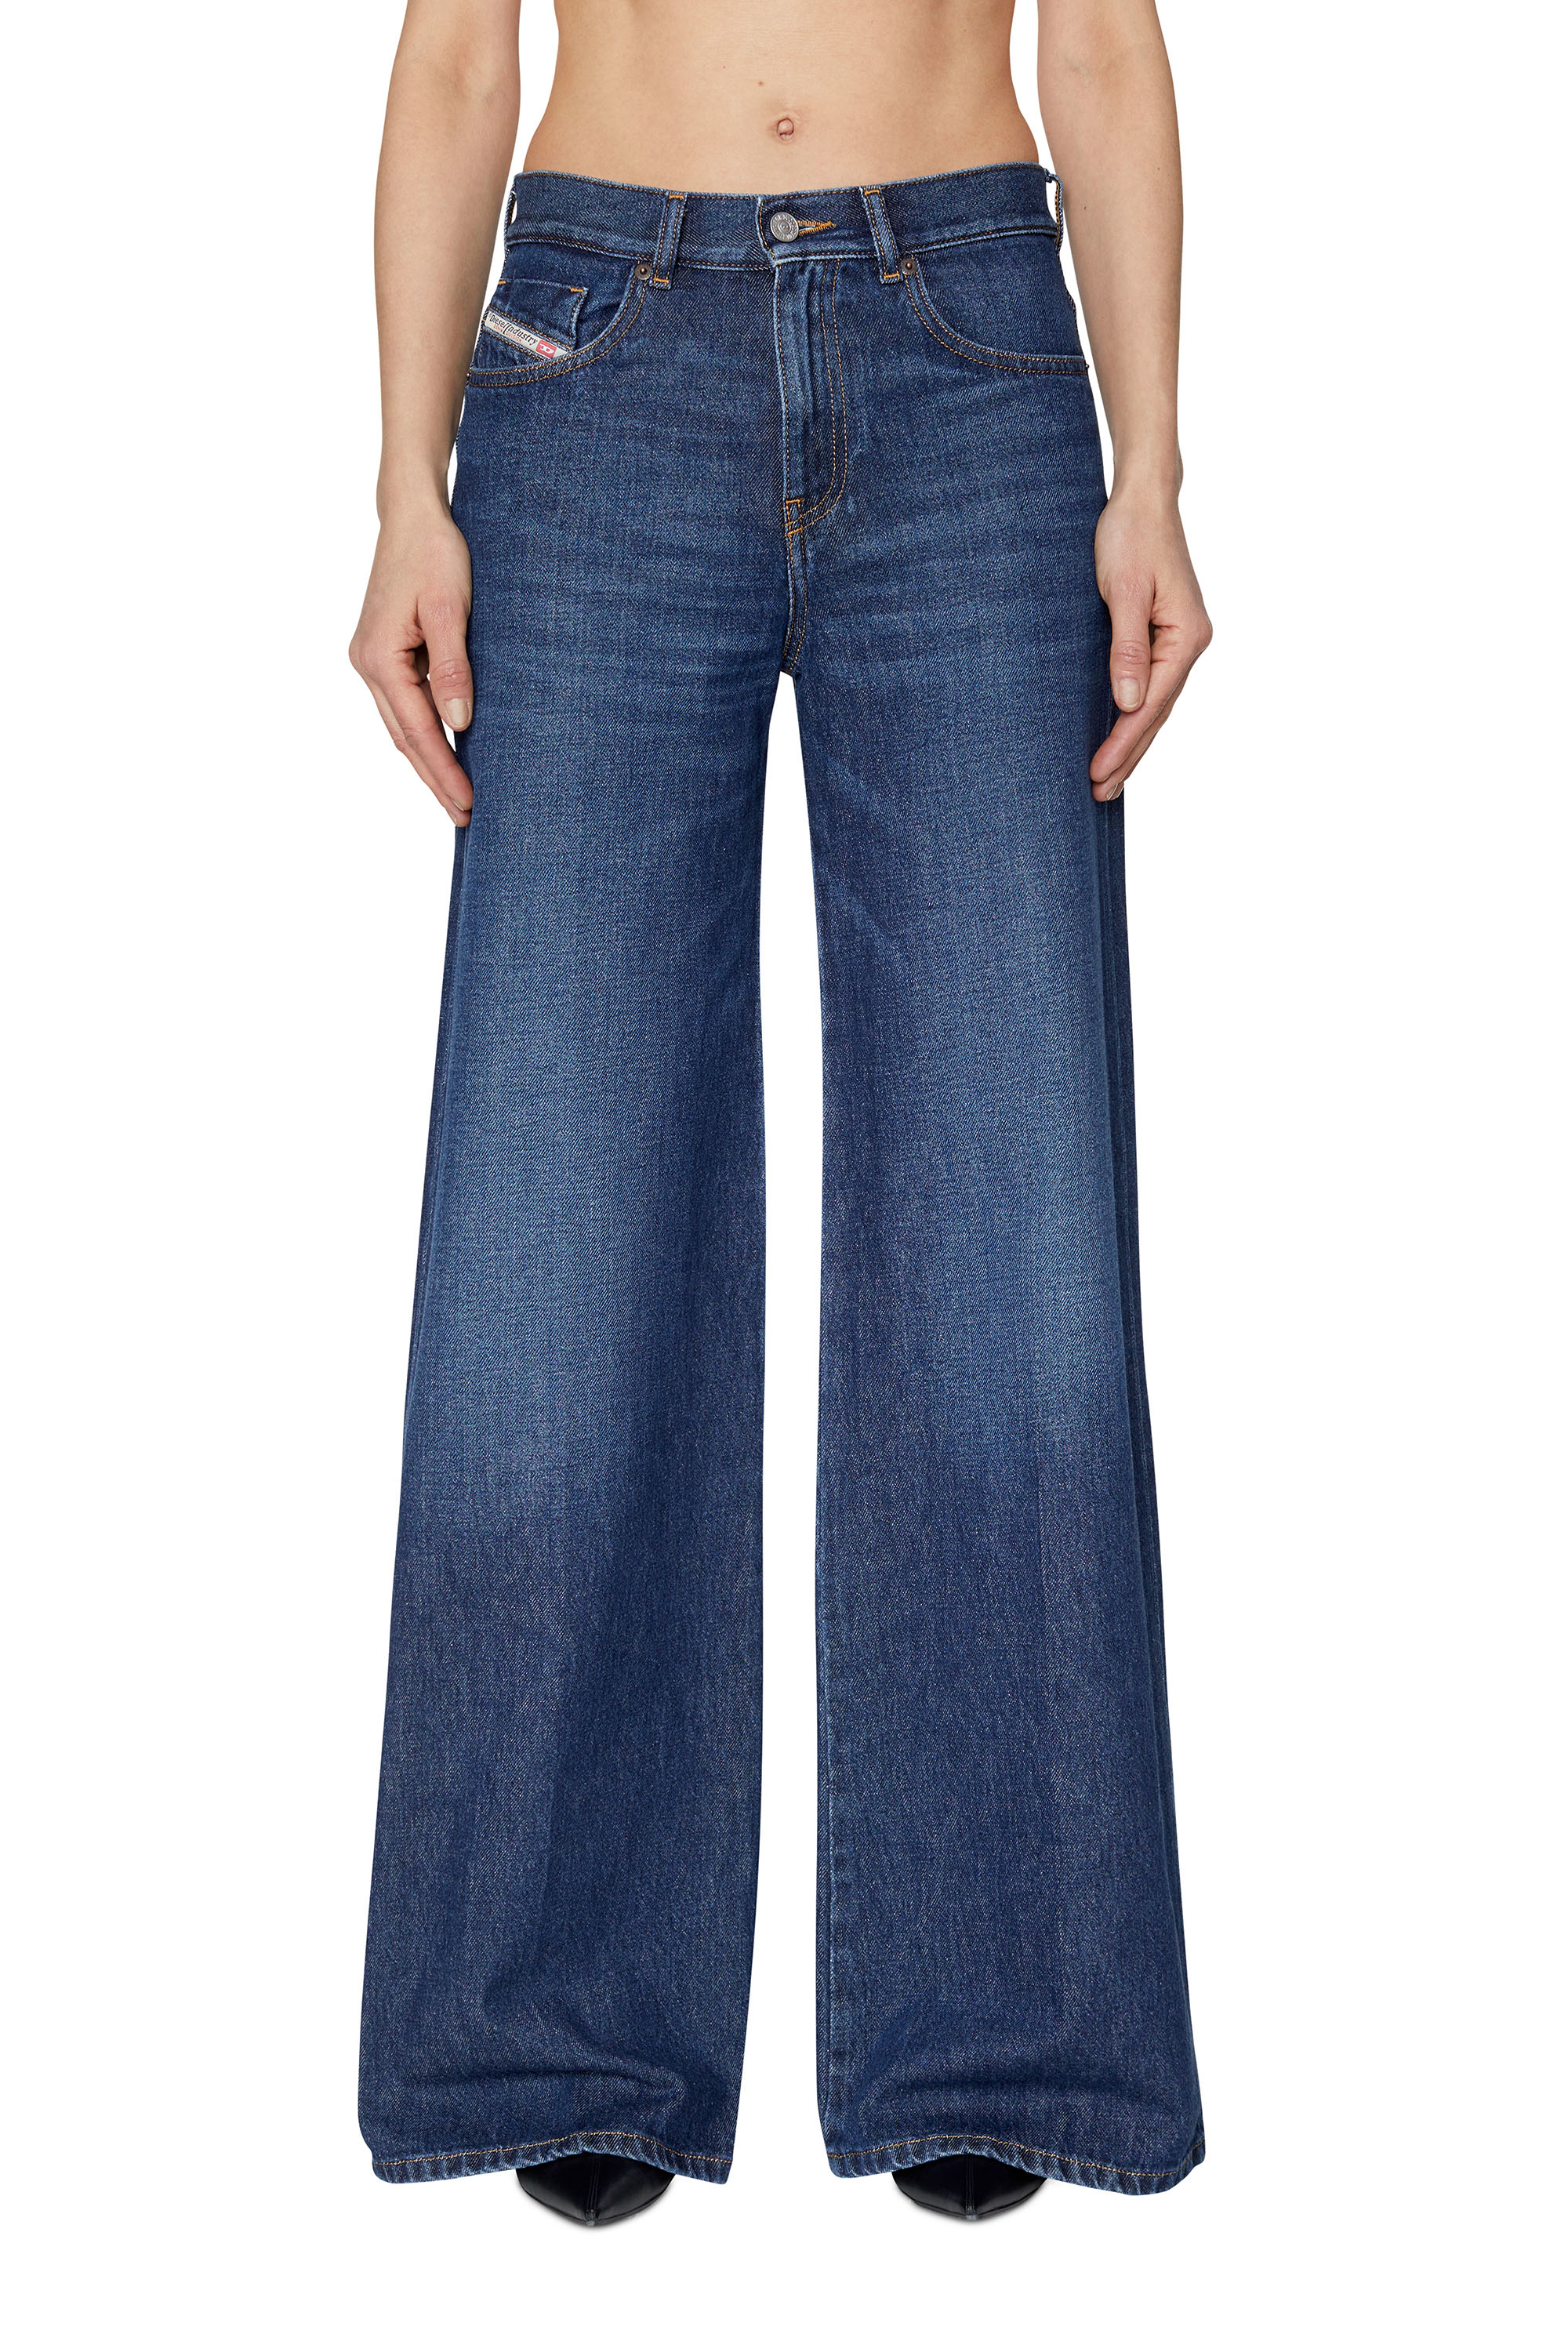 Bootcut and Flare Jeans 1978 D-Akemi 09C03